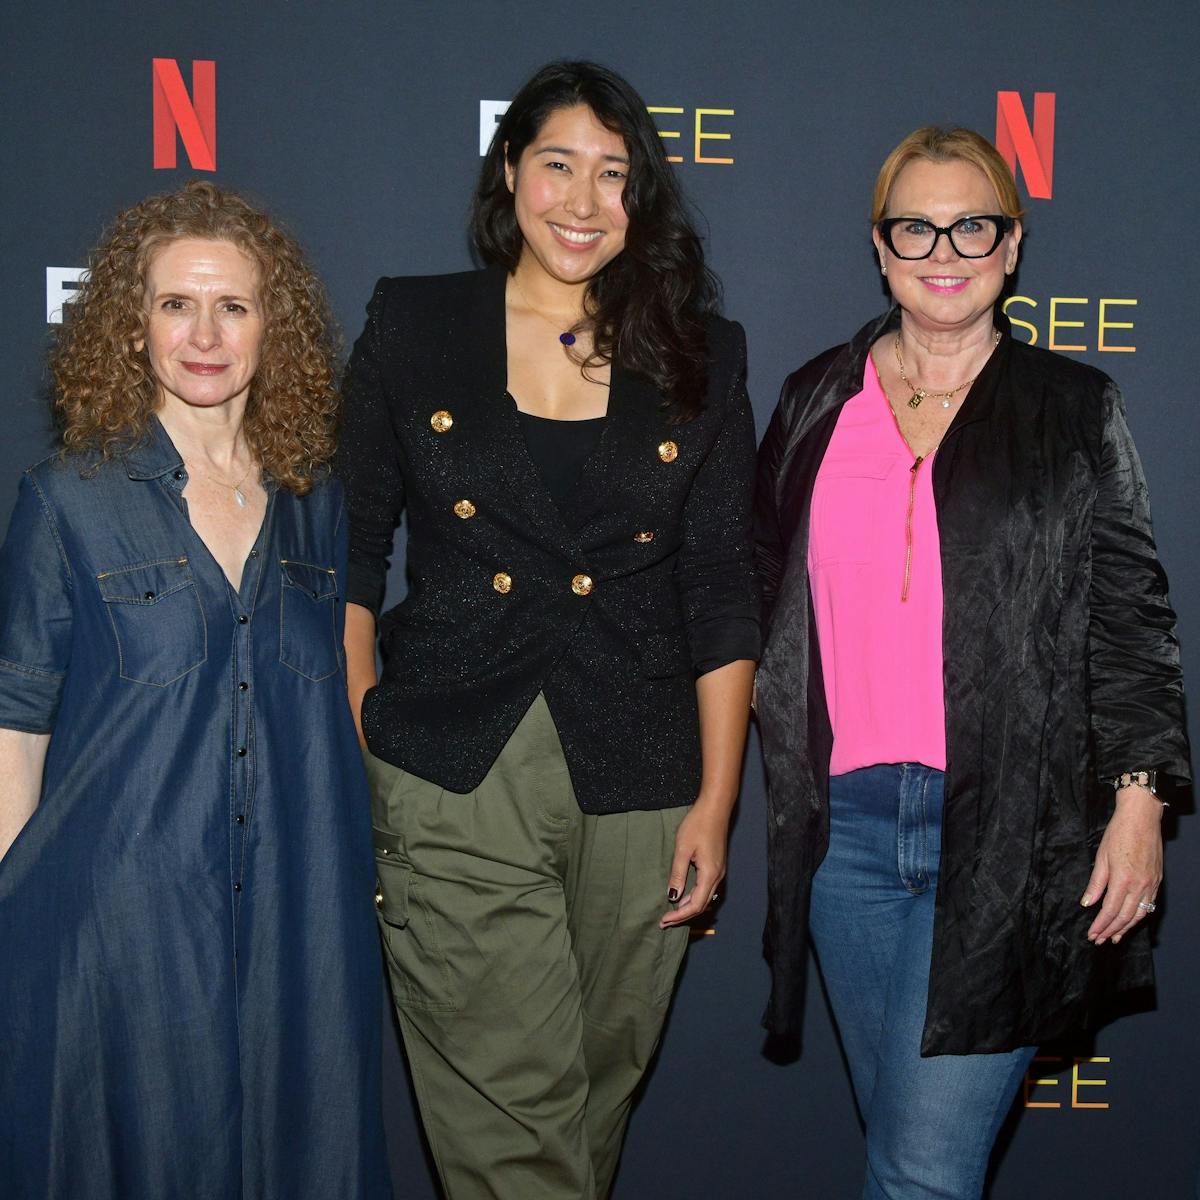 Jennifer Flackett (Big Mouth and Human Resources), Emily Dean (Love, Death + Robots), Melinda Dilger (Arcane), and Kelly Galuska (Human Resources) pose on the red carpet against a Netflix FYSEE background.